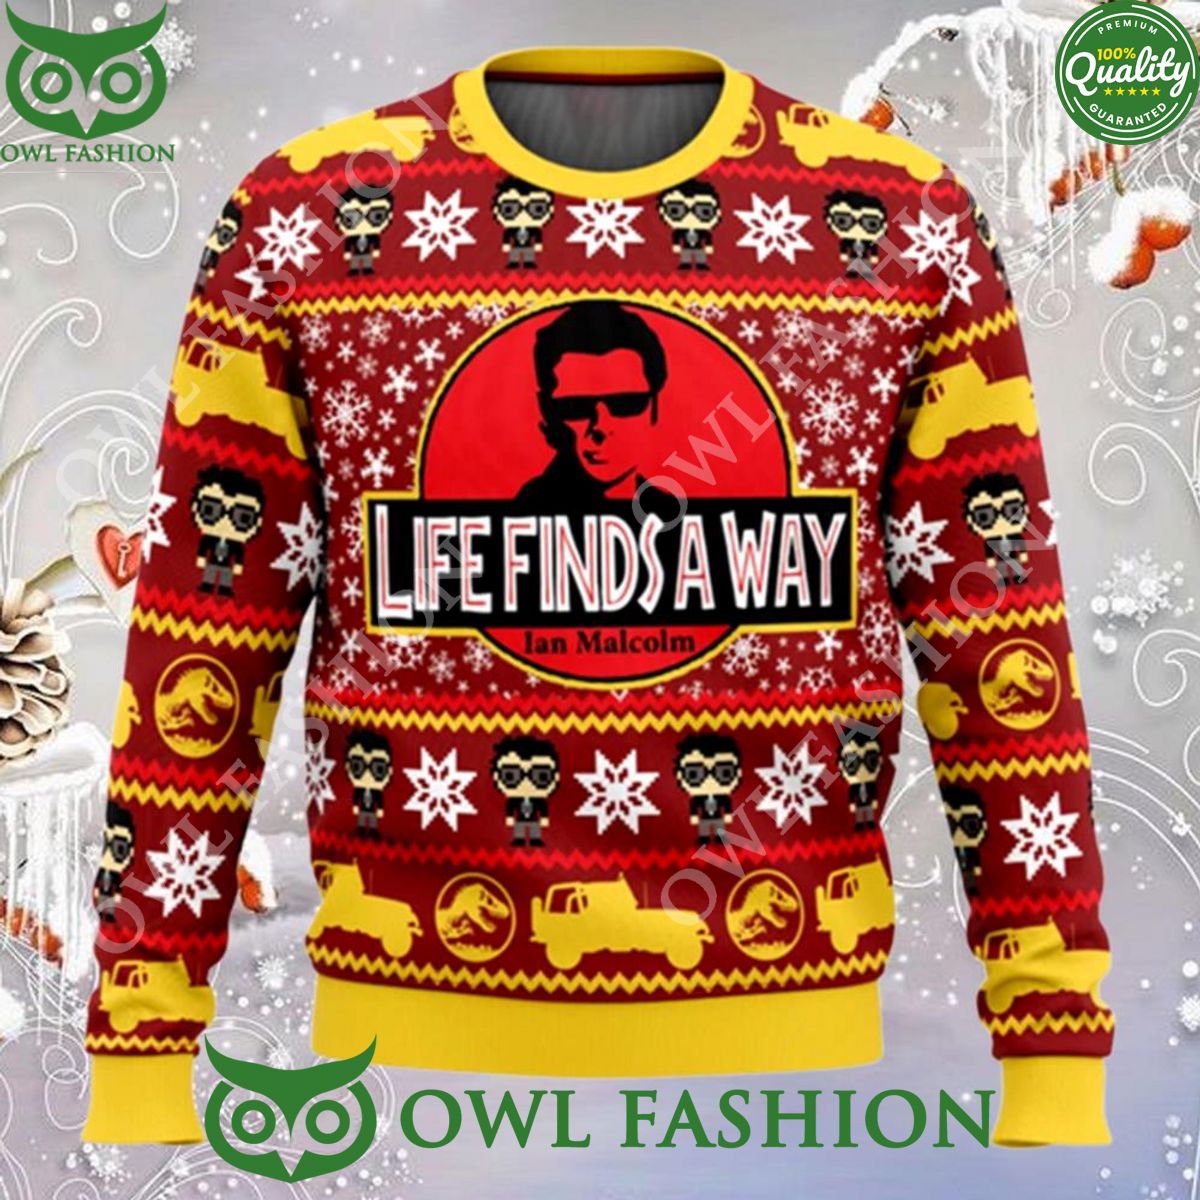 life finds a way jurassic part ugly christmas sweater jumper 1 UL0bb.jpg